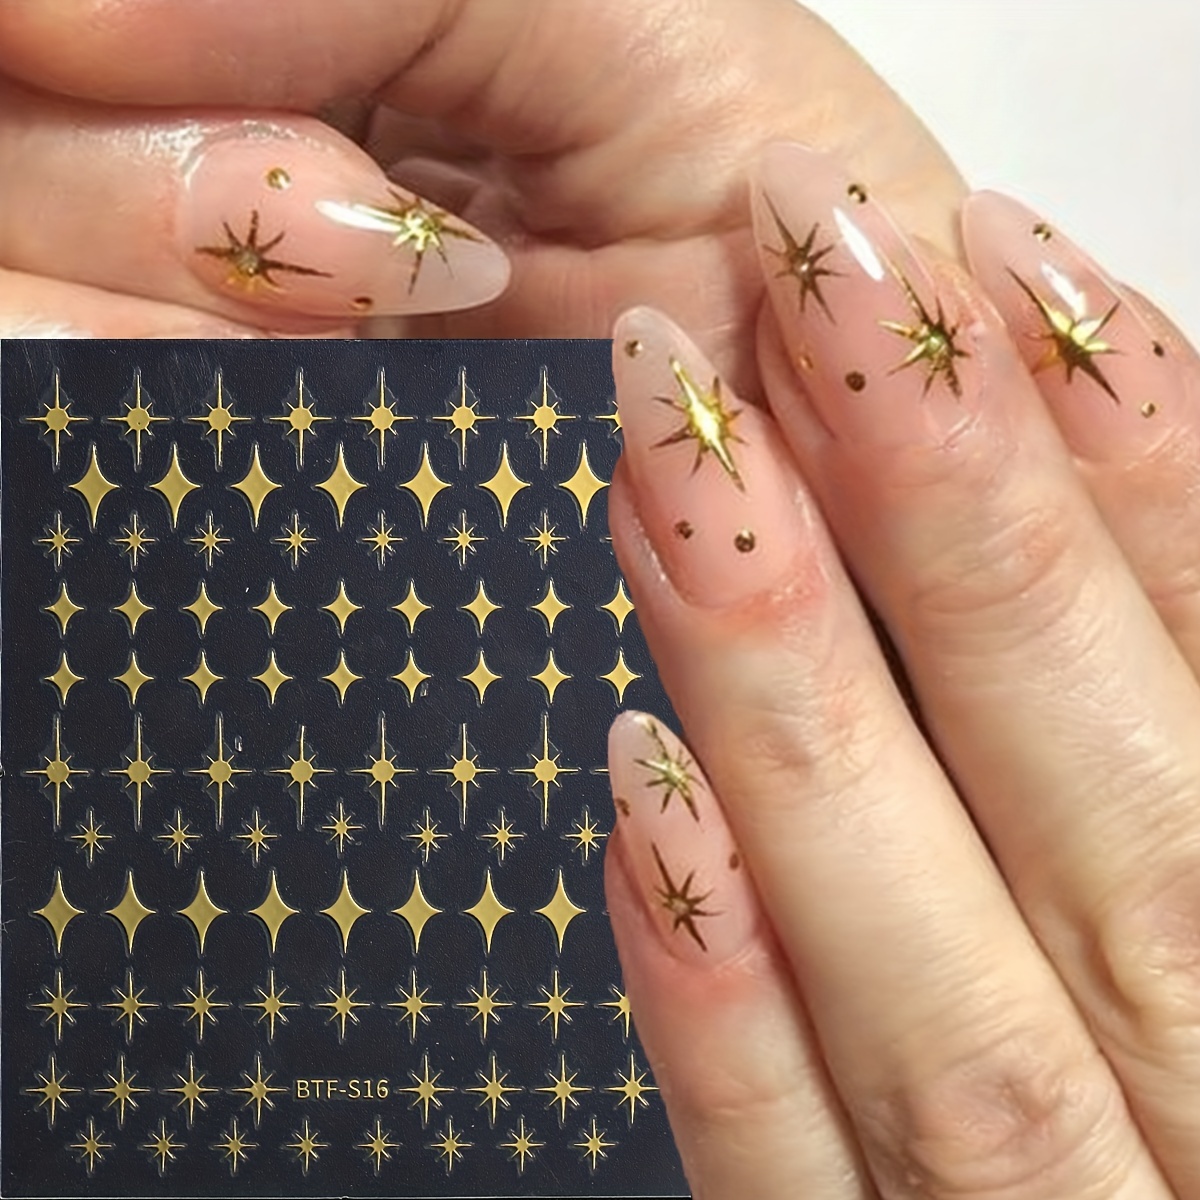 Stickers Decals Approx bag SilverGold English Words Peace Happy Kiss Hello  Nonadhesive Soft Metal Sticker Nail Art Decoration M39 230712 From Zuo06,  $9.11